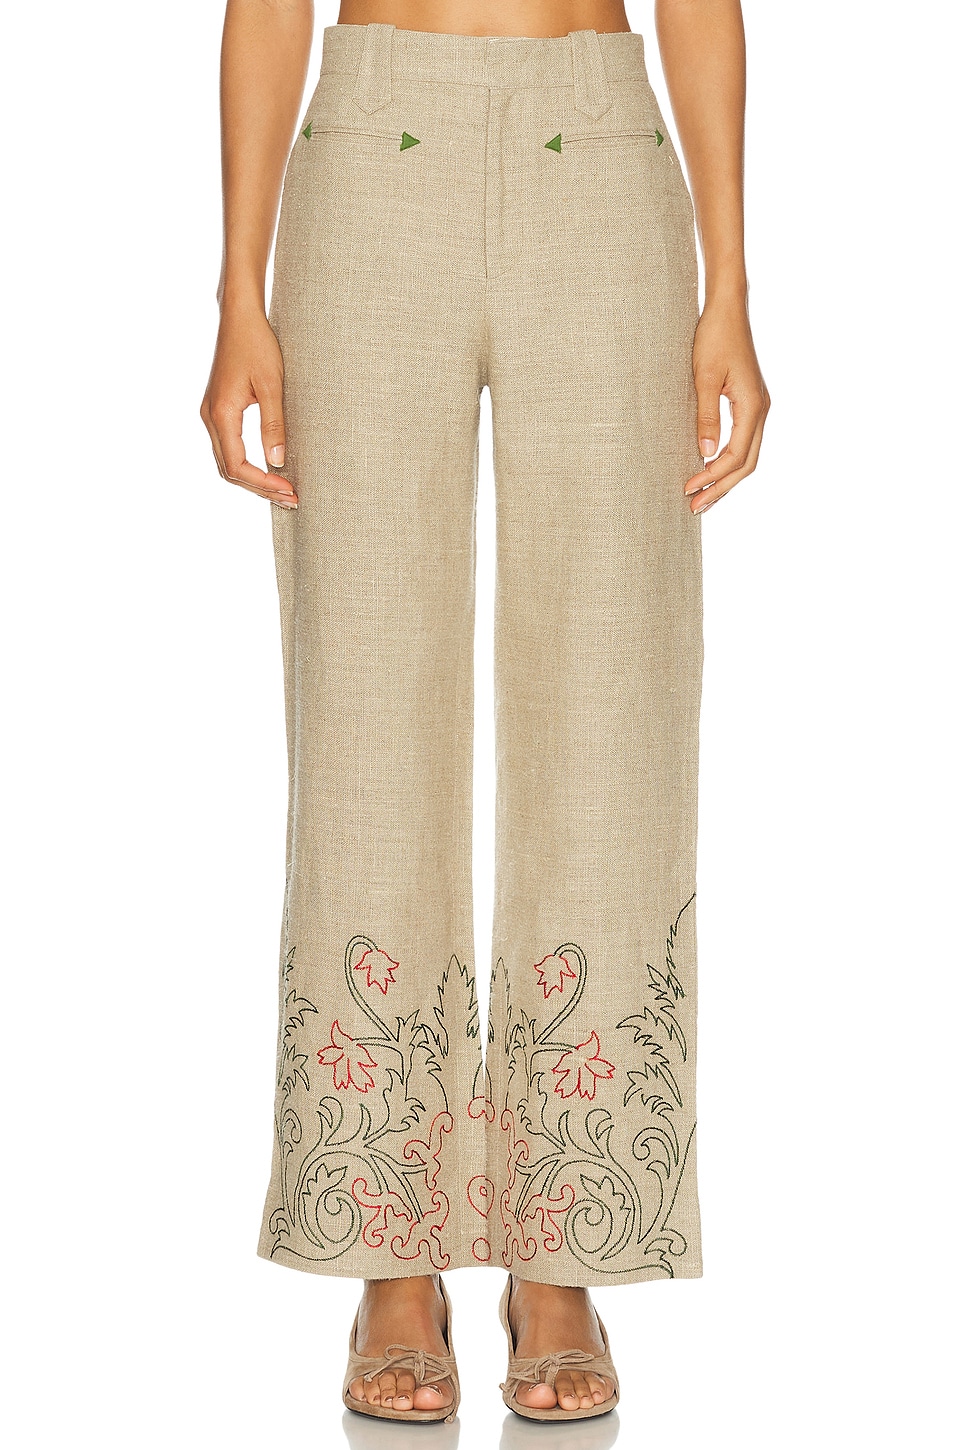 Embroidered Trumpet Flower Murphy Trouser in Tan